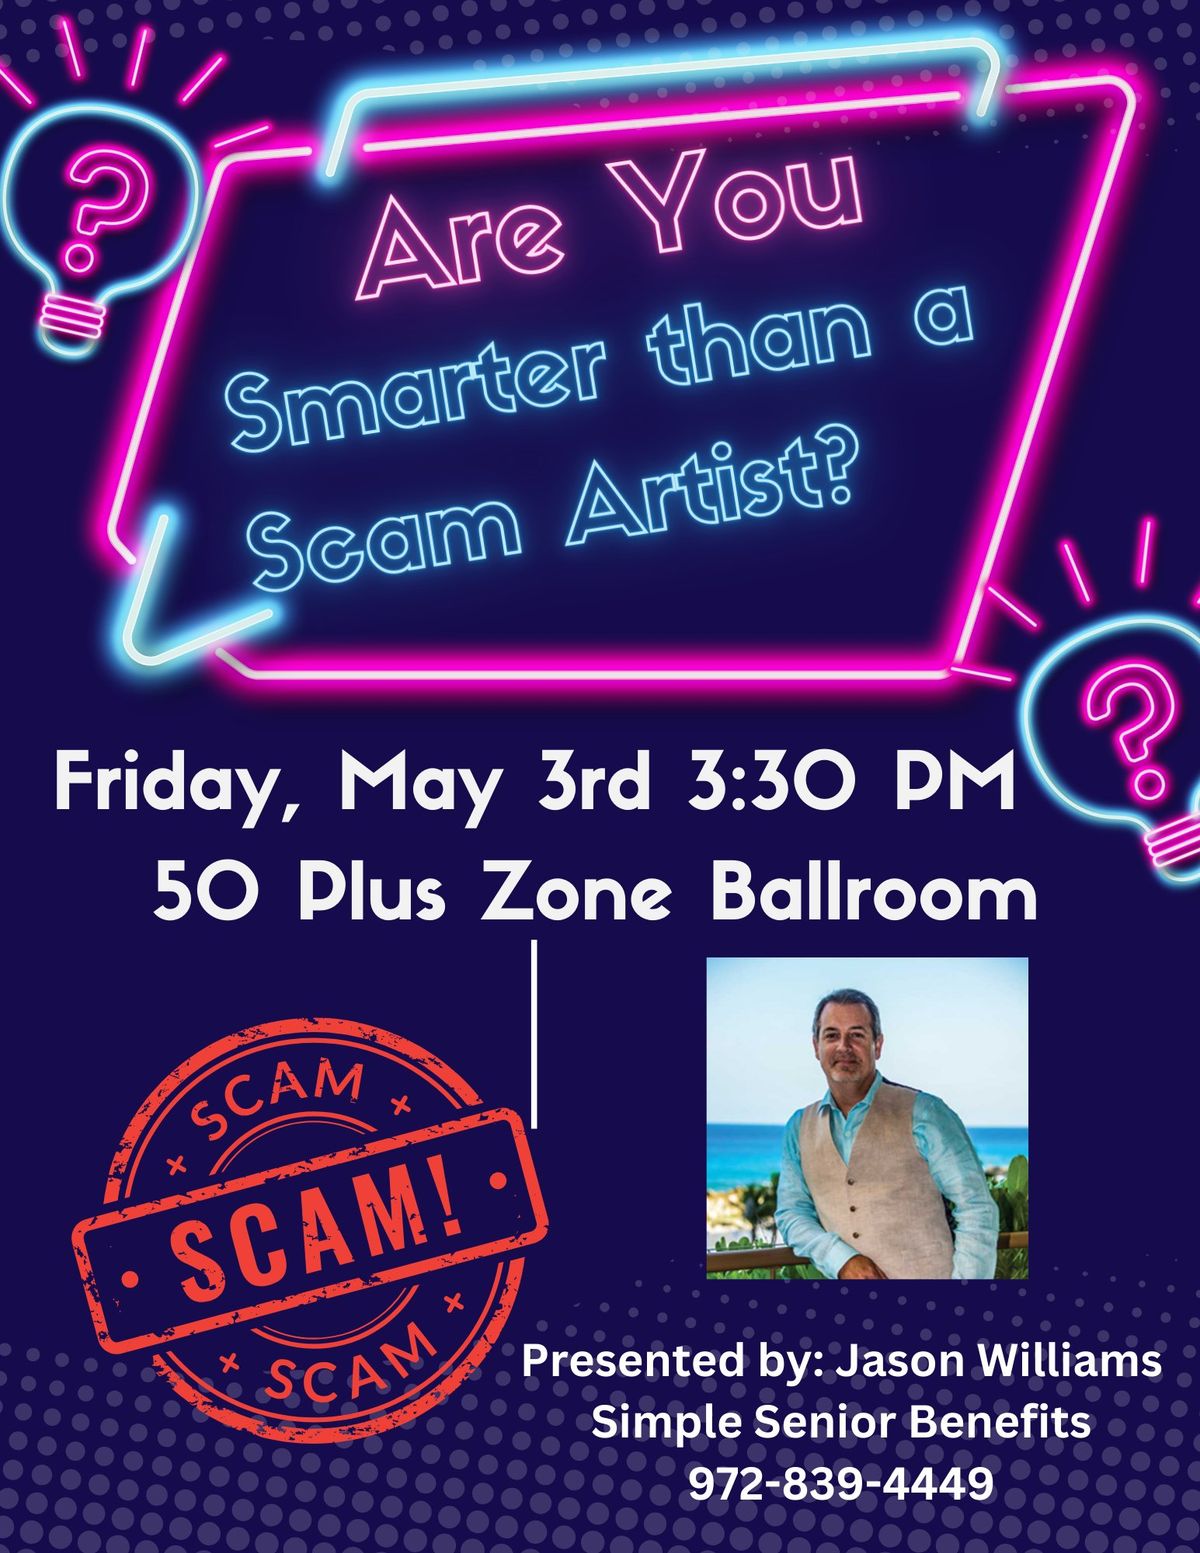 Are You smarter Than A Scam Artist?